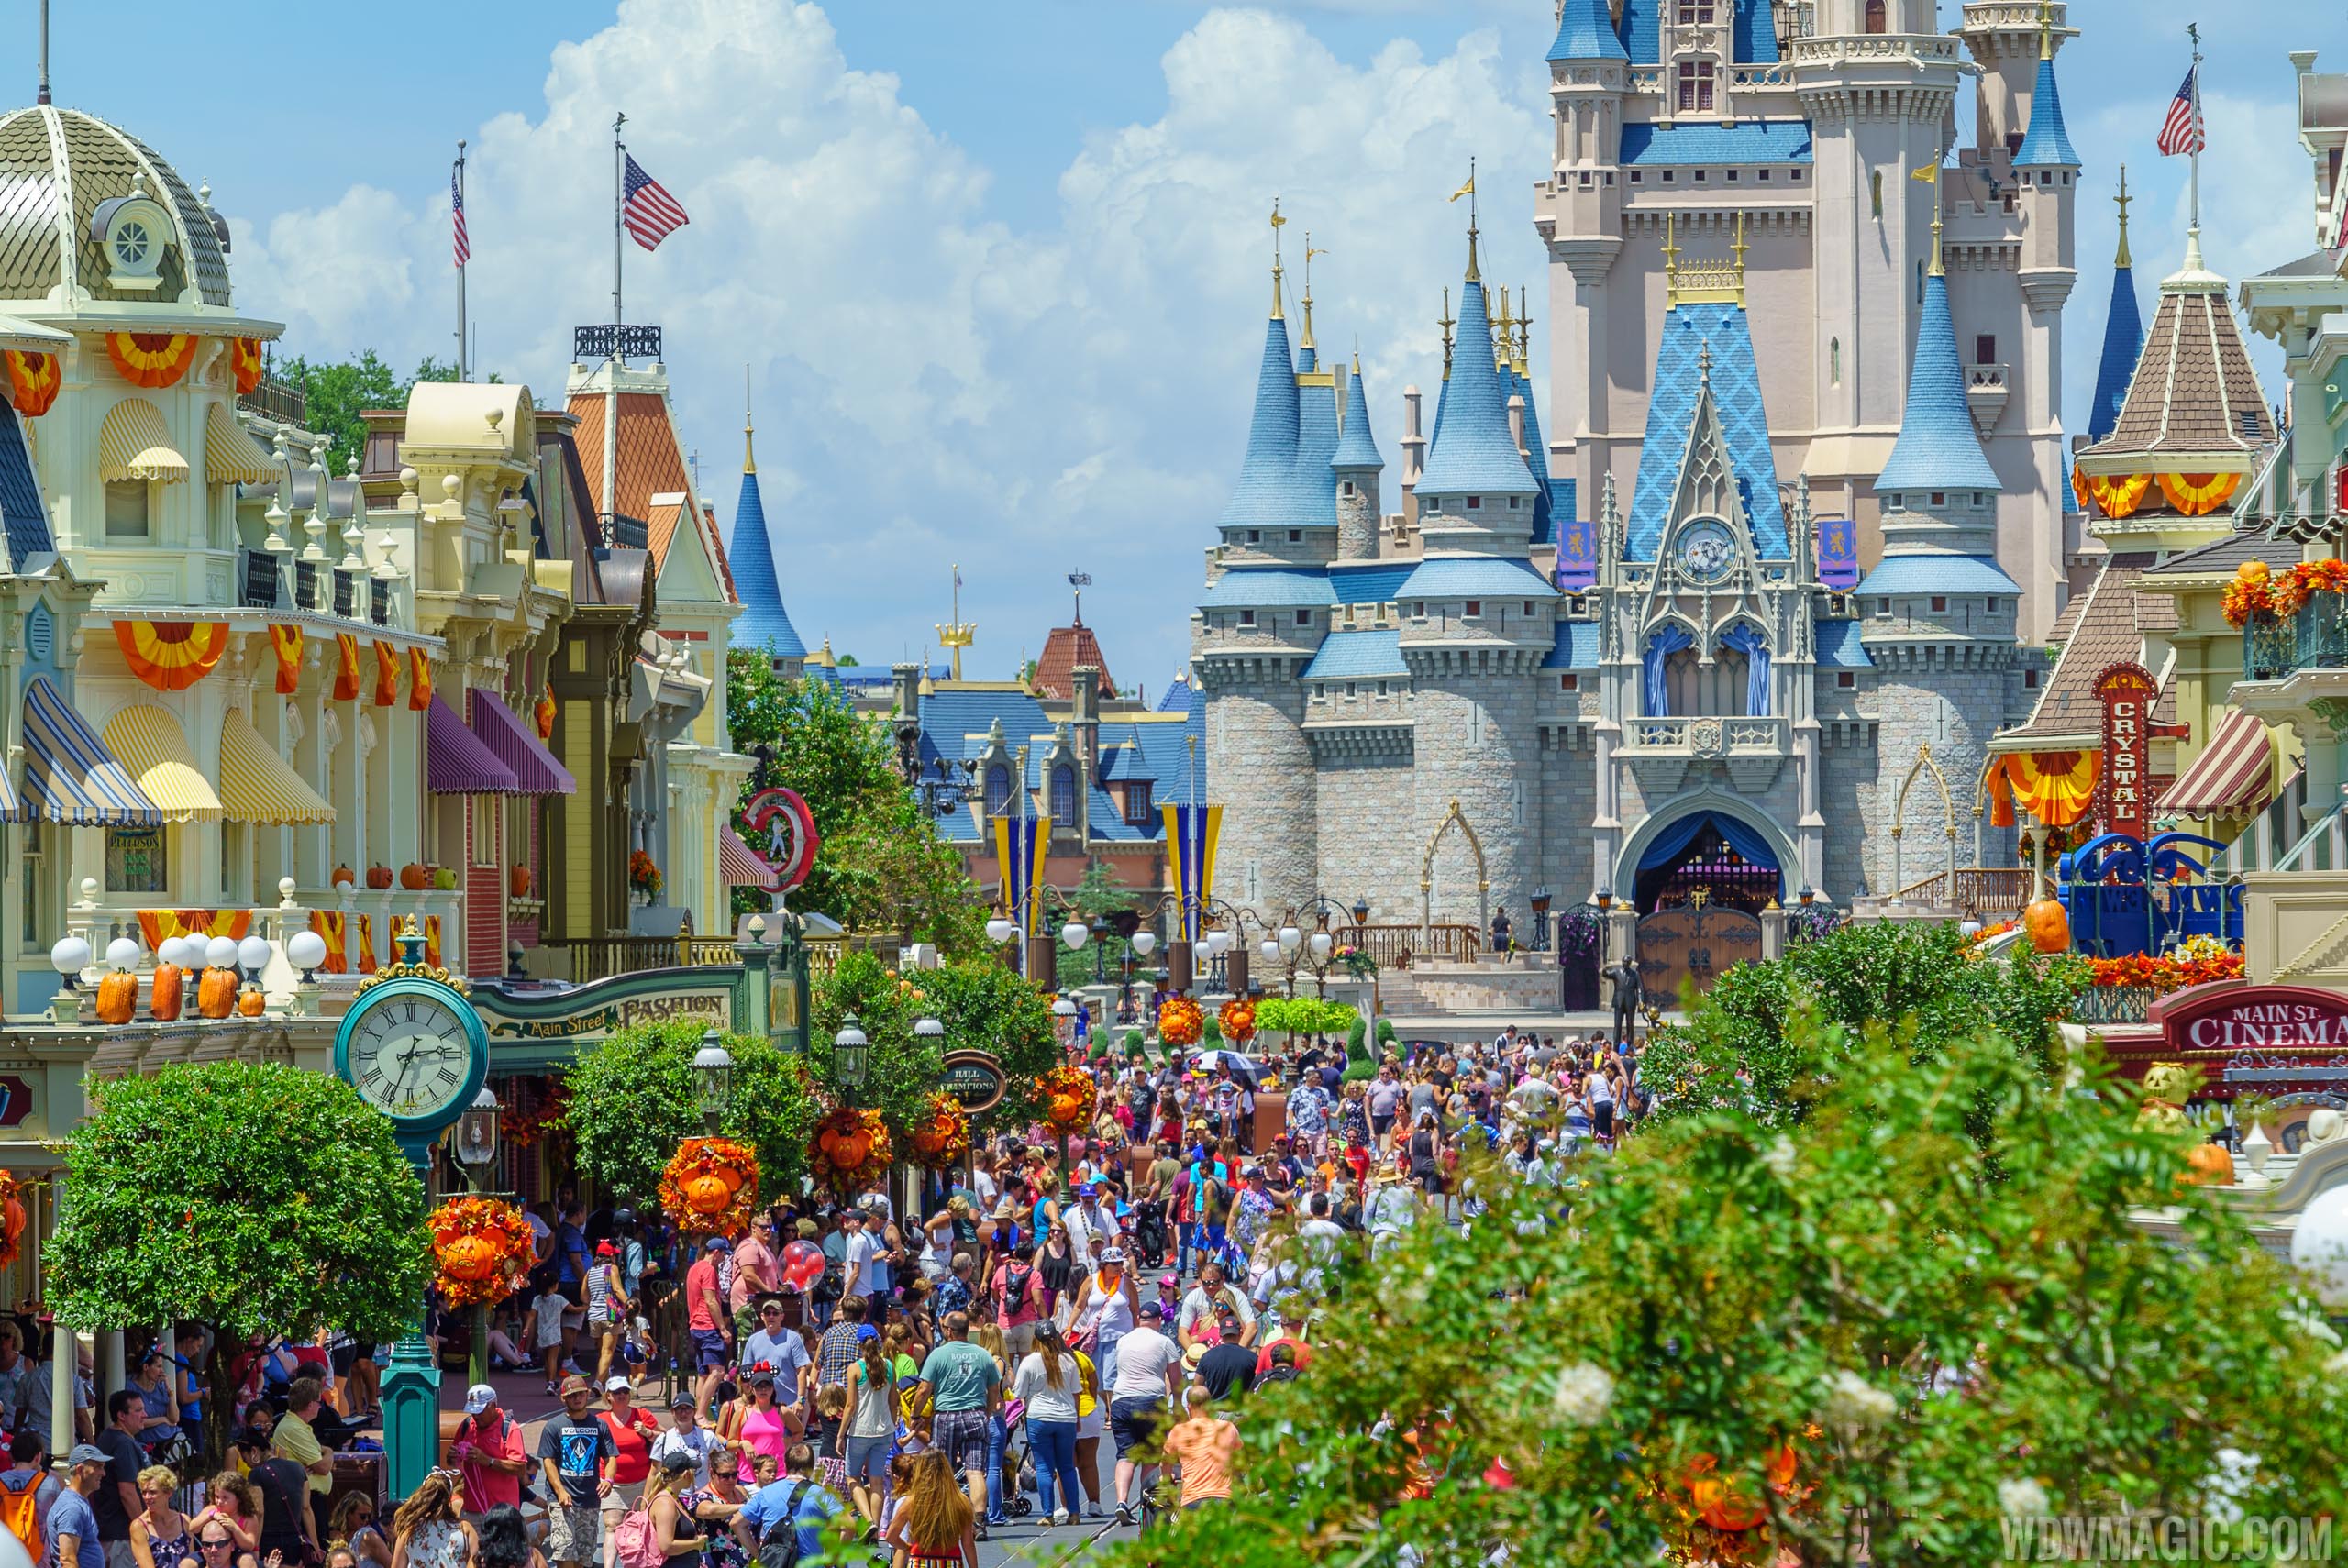 August Operating Hours For Magic Kingdom Suggest An Earlier Start